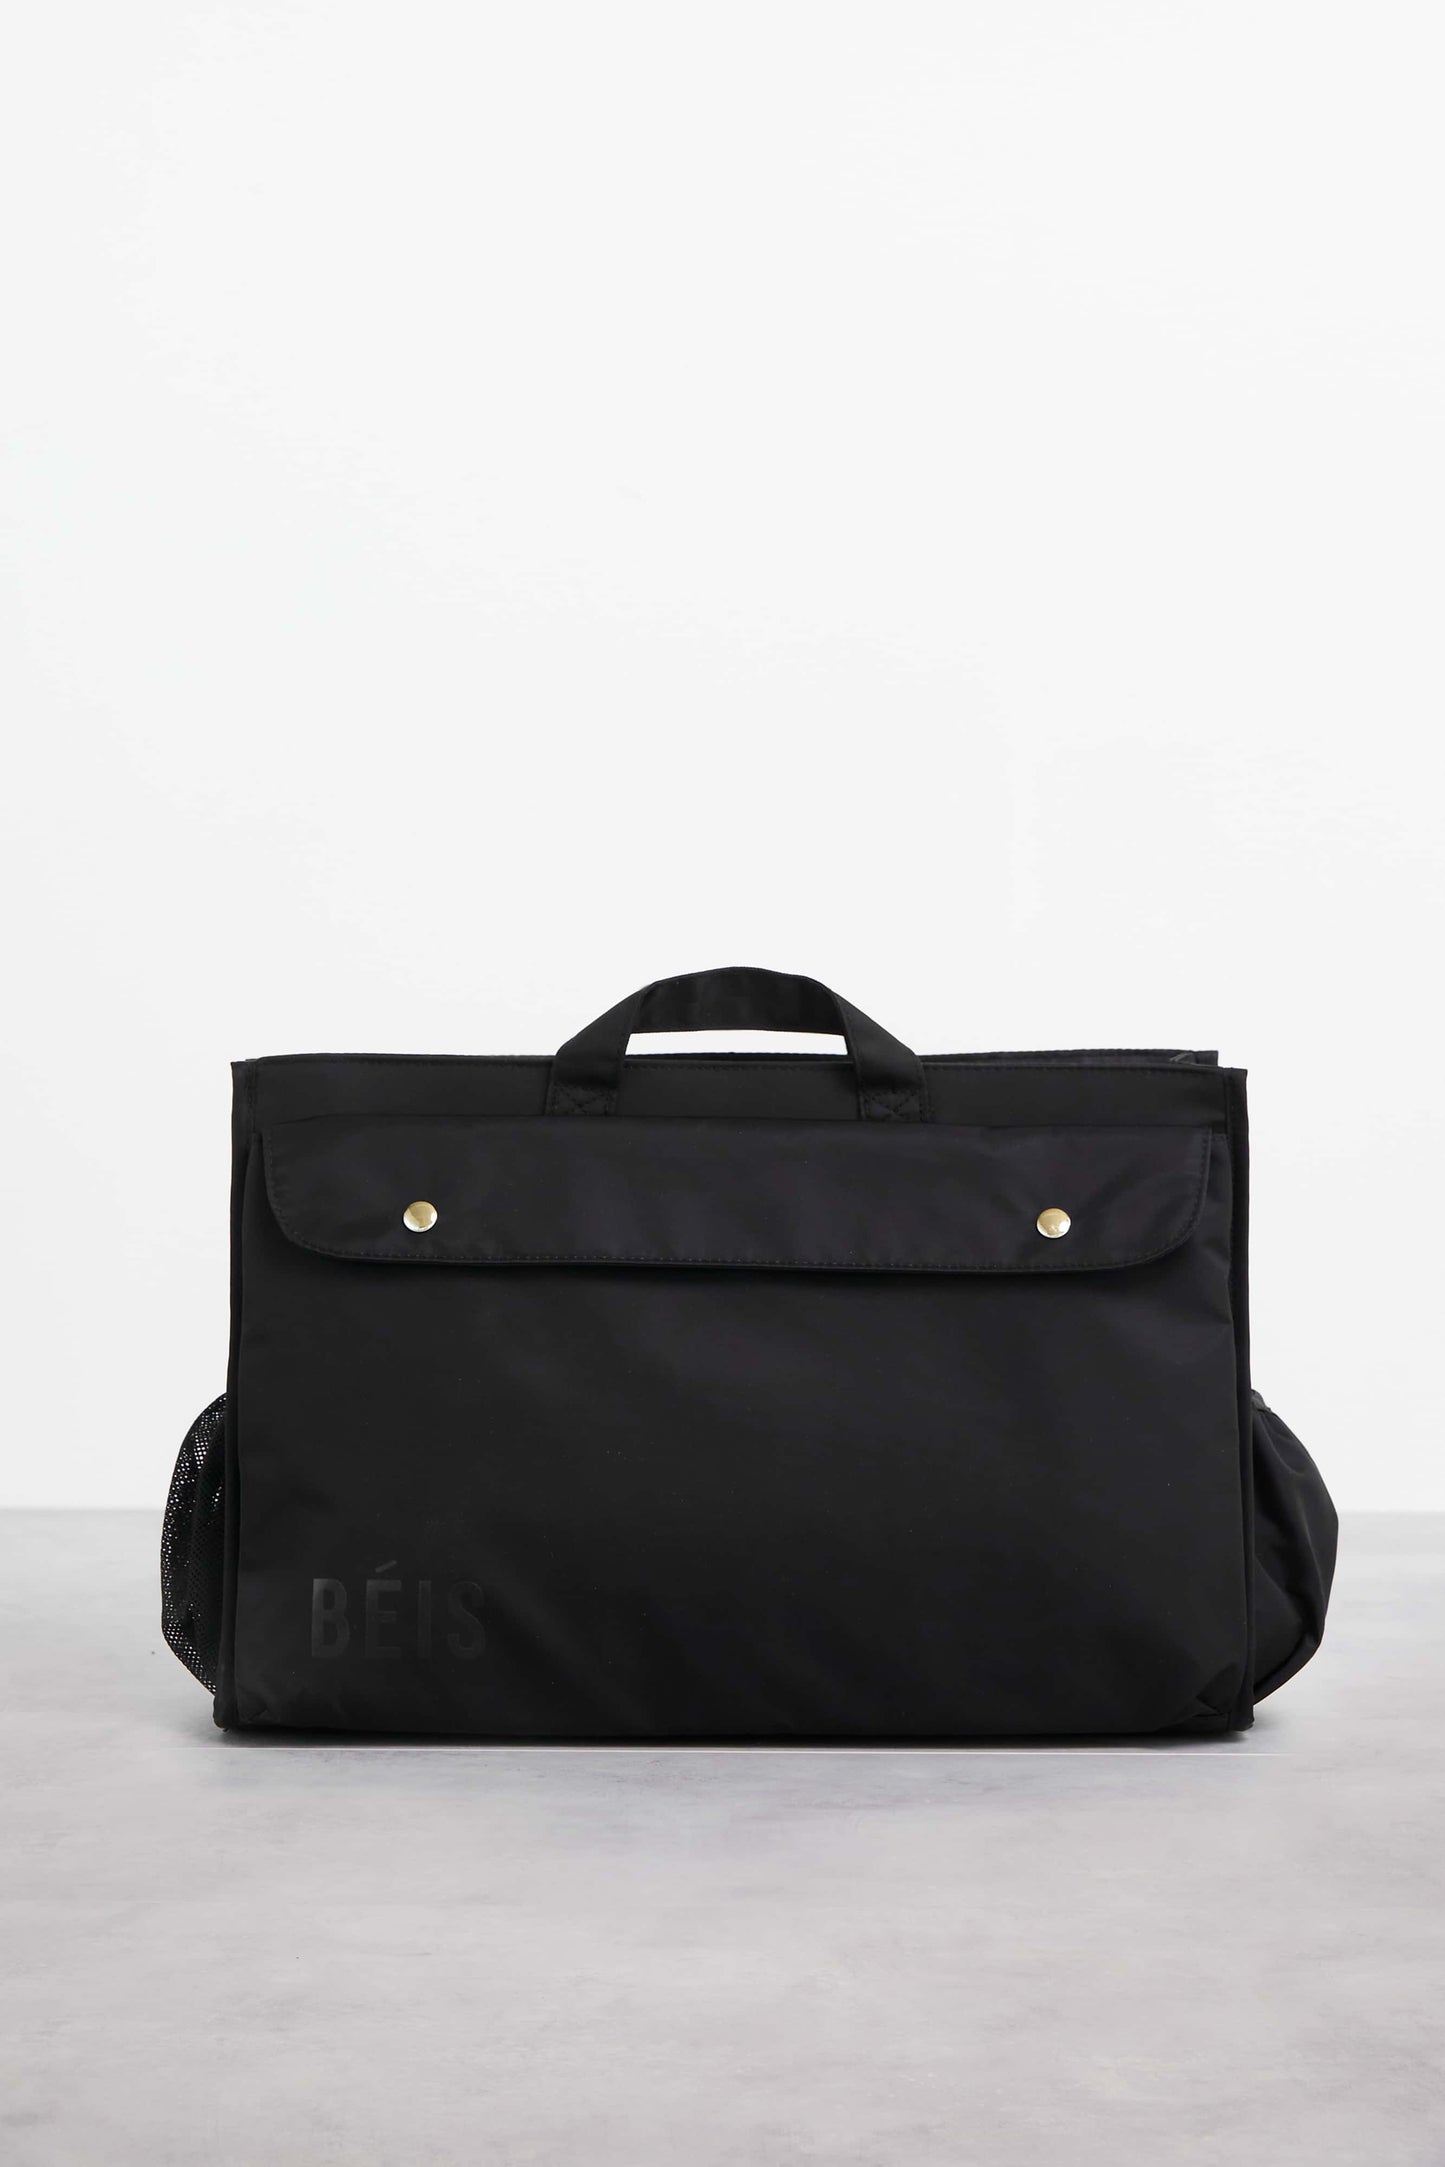 Tote Insert Black Side with One Pocket